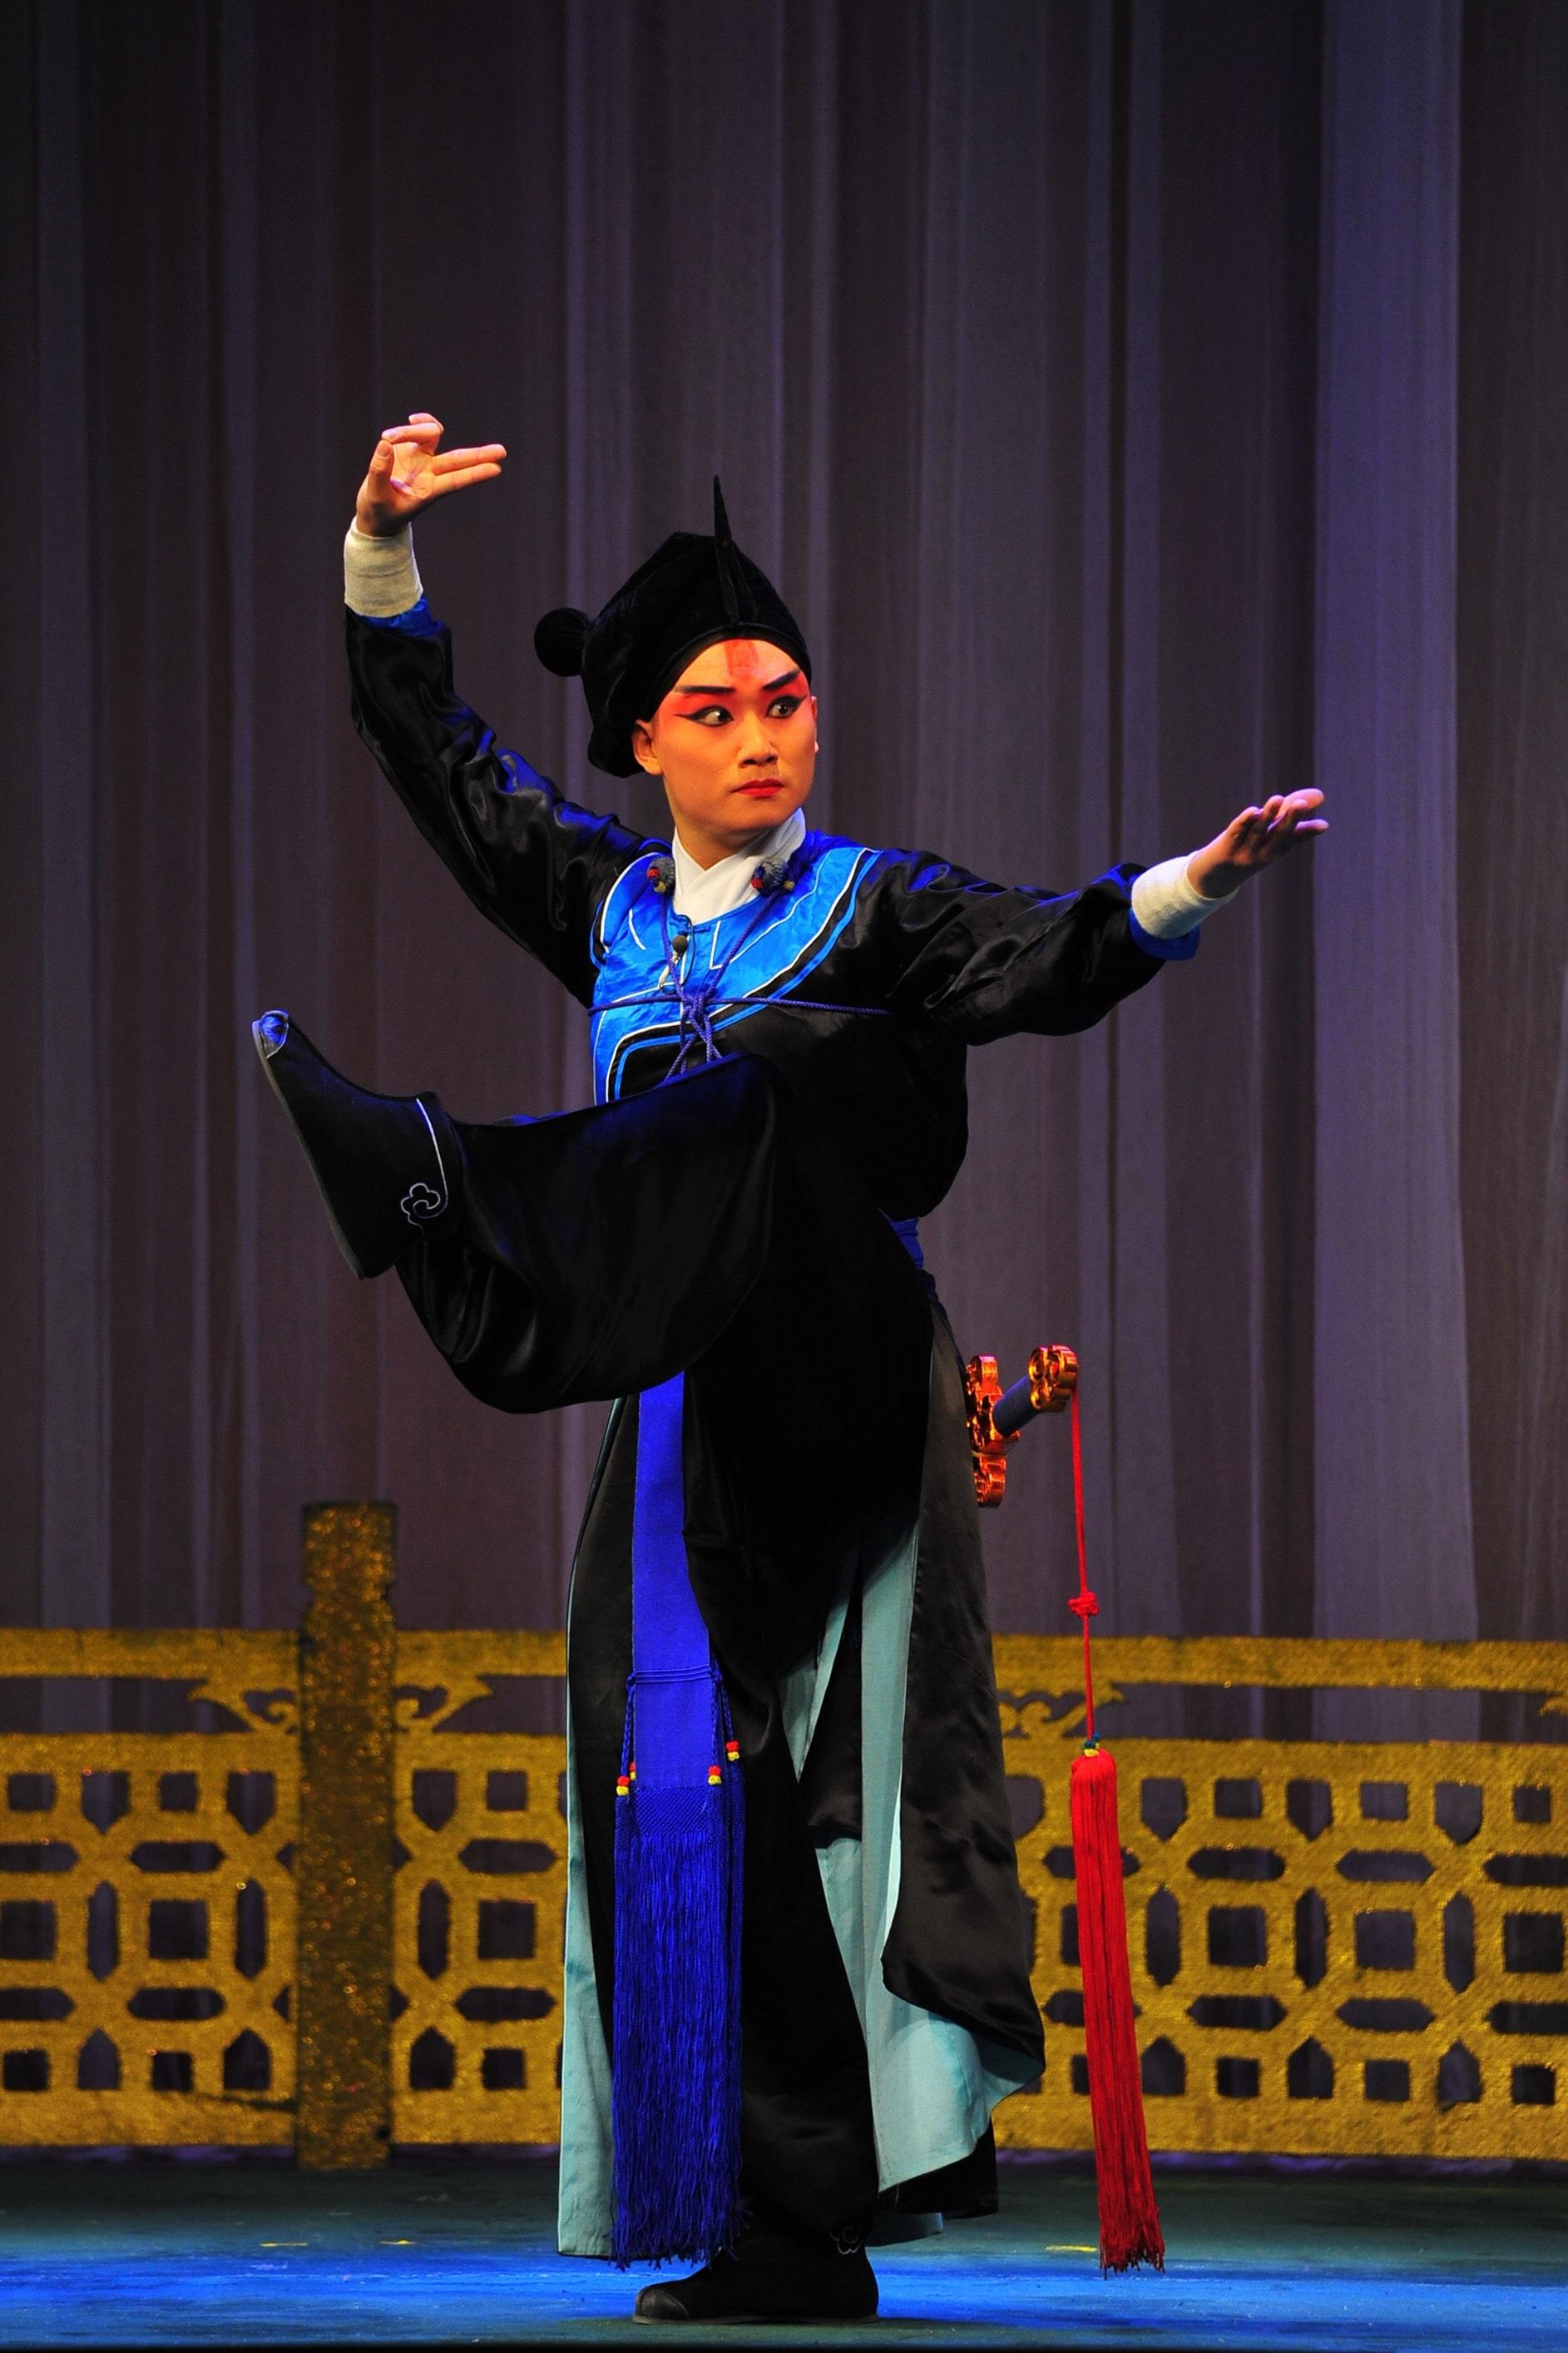 The inaugural Chinese Culture Festival will stage three classic Northern Kunqu opera plays in July. Photo shows a scene from the performance "Fleeing by Night" from "Lin Chong on the Run".